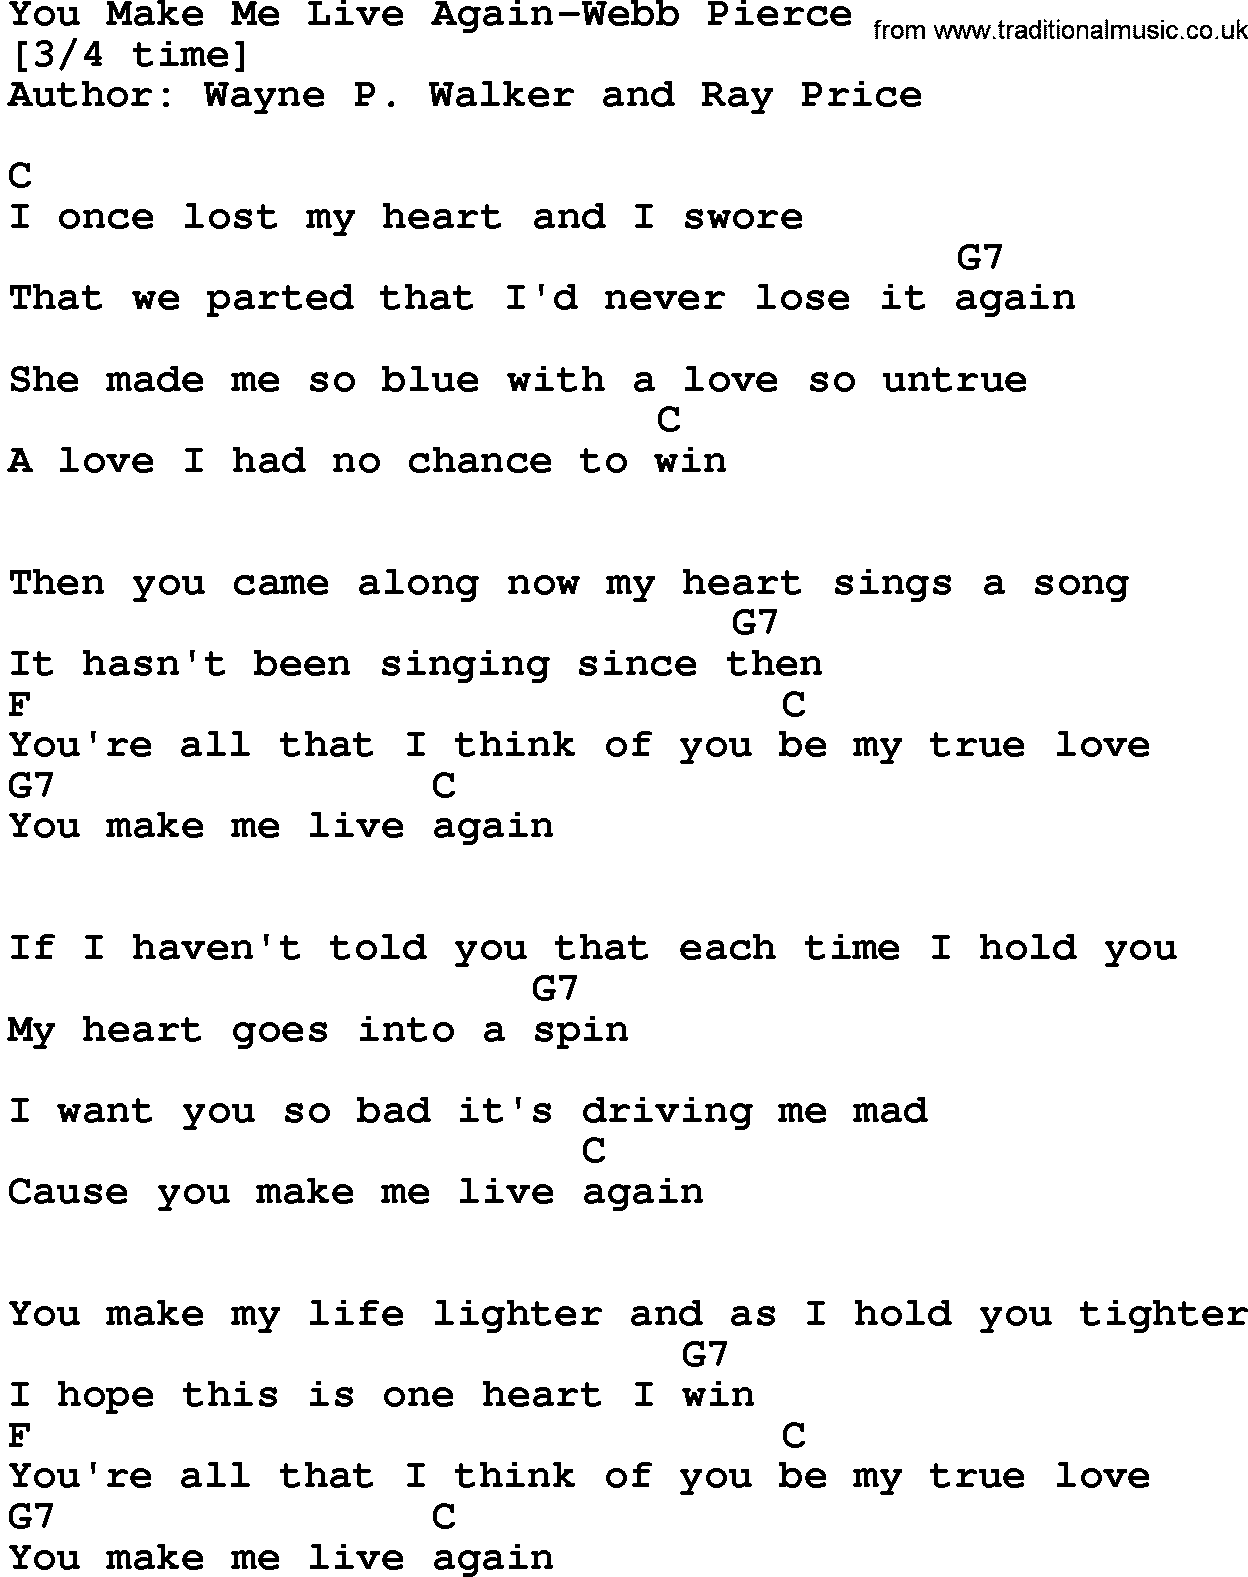 Country music song: You Make Me Live Again-Webb Pierce lyrics and chords